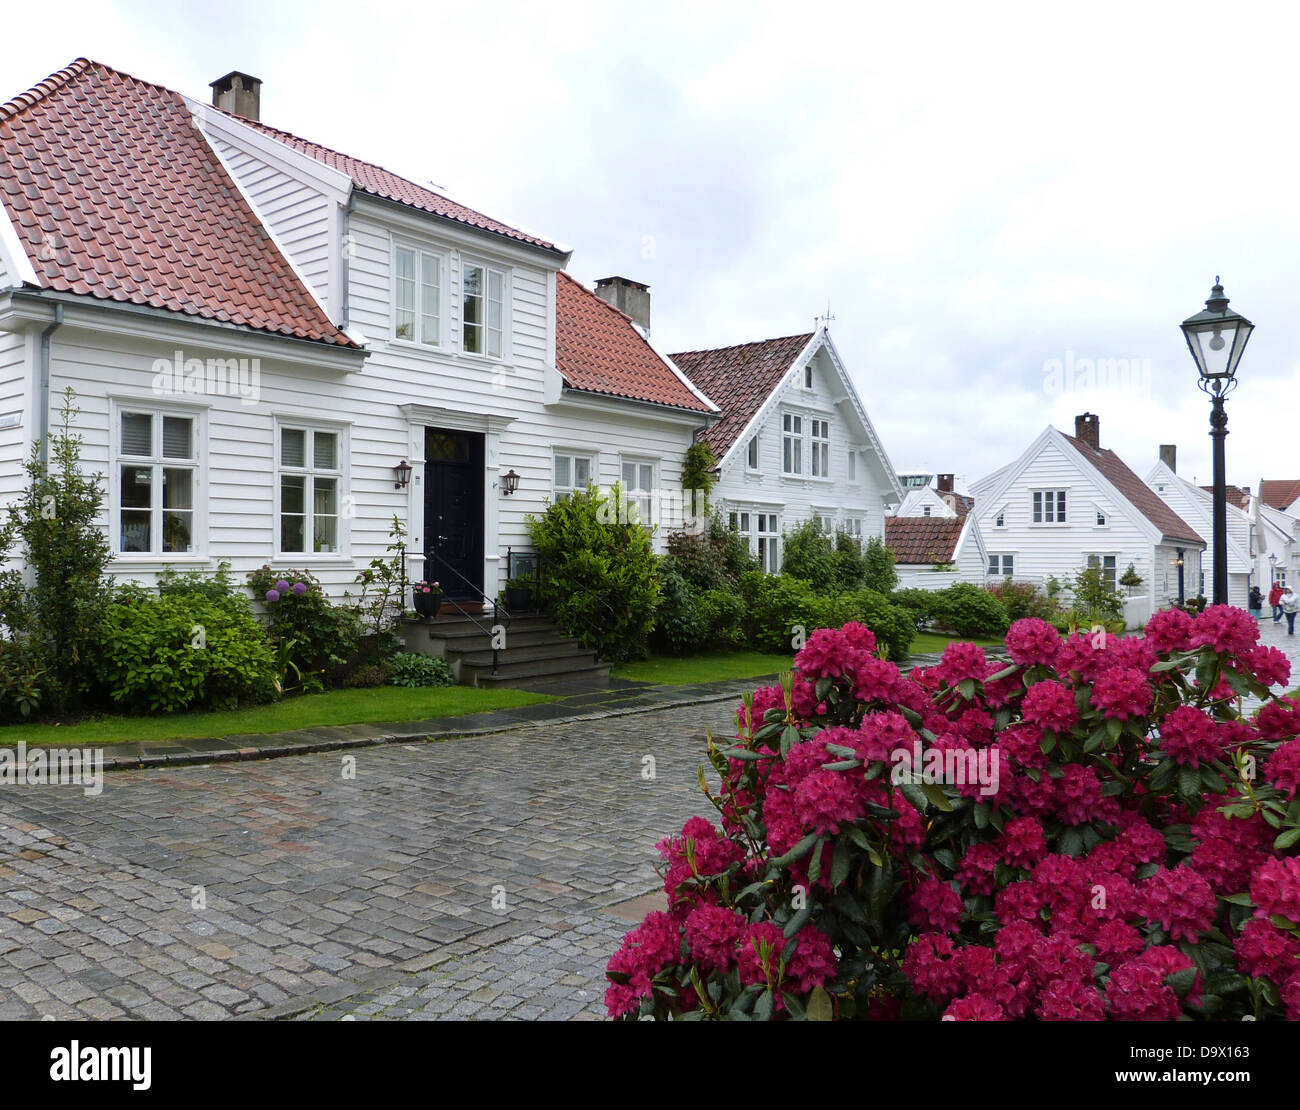 Wooden houses in Stavanger Old Town, Norway. Stock Photo